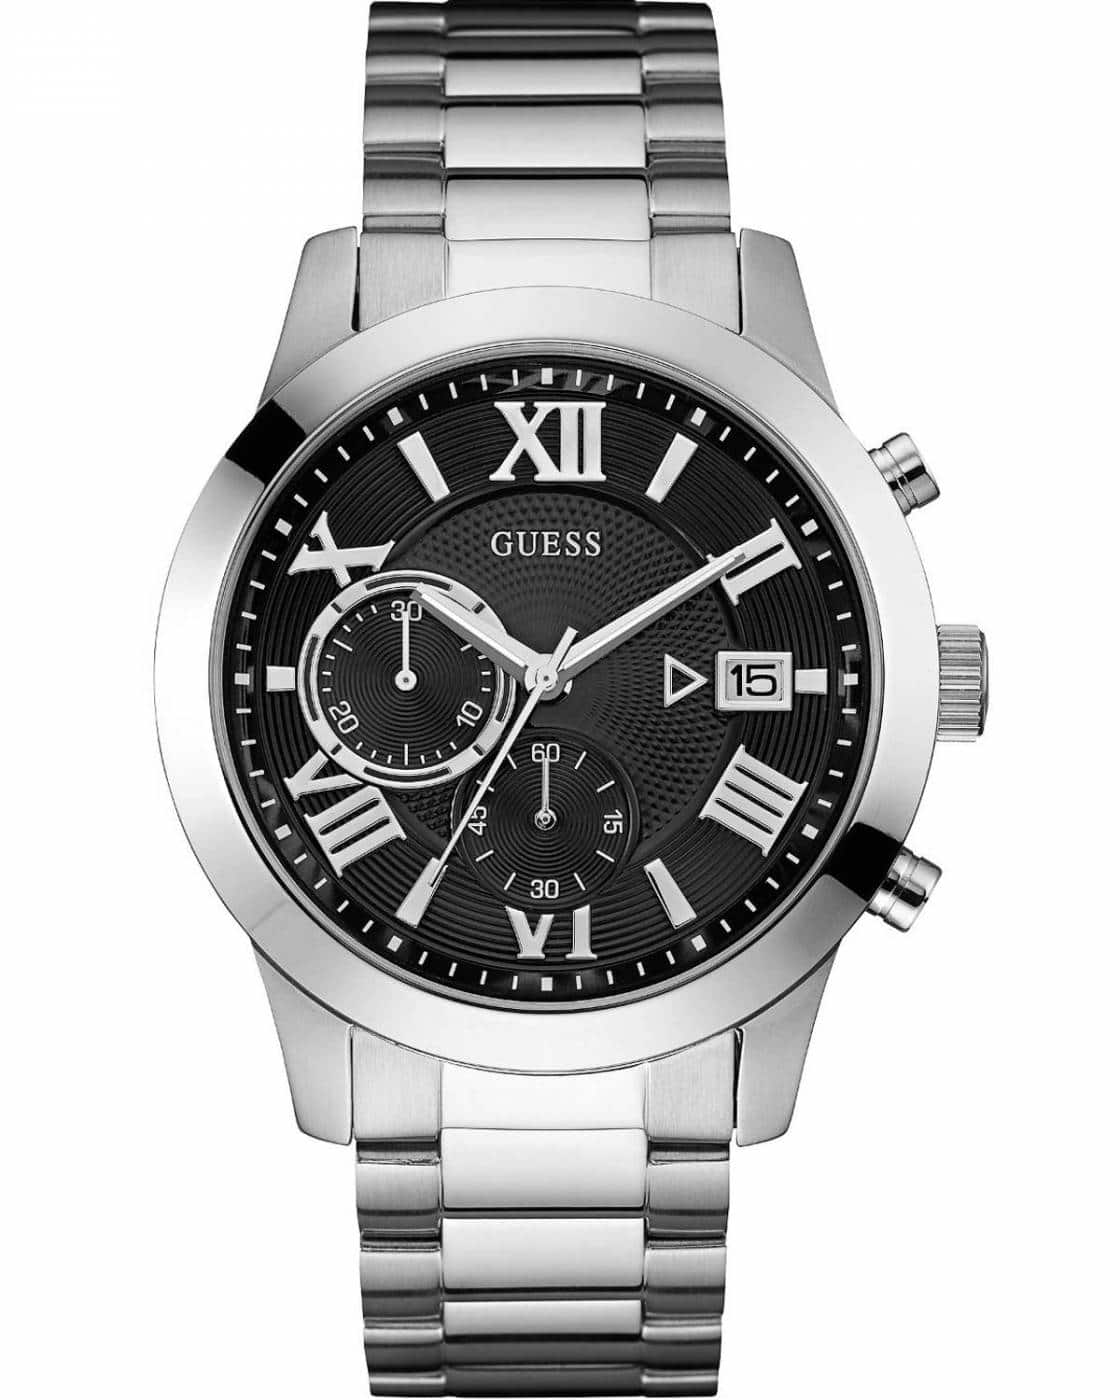 GUESS WATCH CHRONOGRAPH STAINLESS STEEL BRACELET